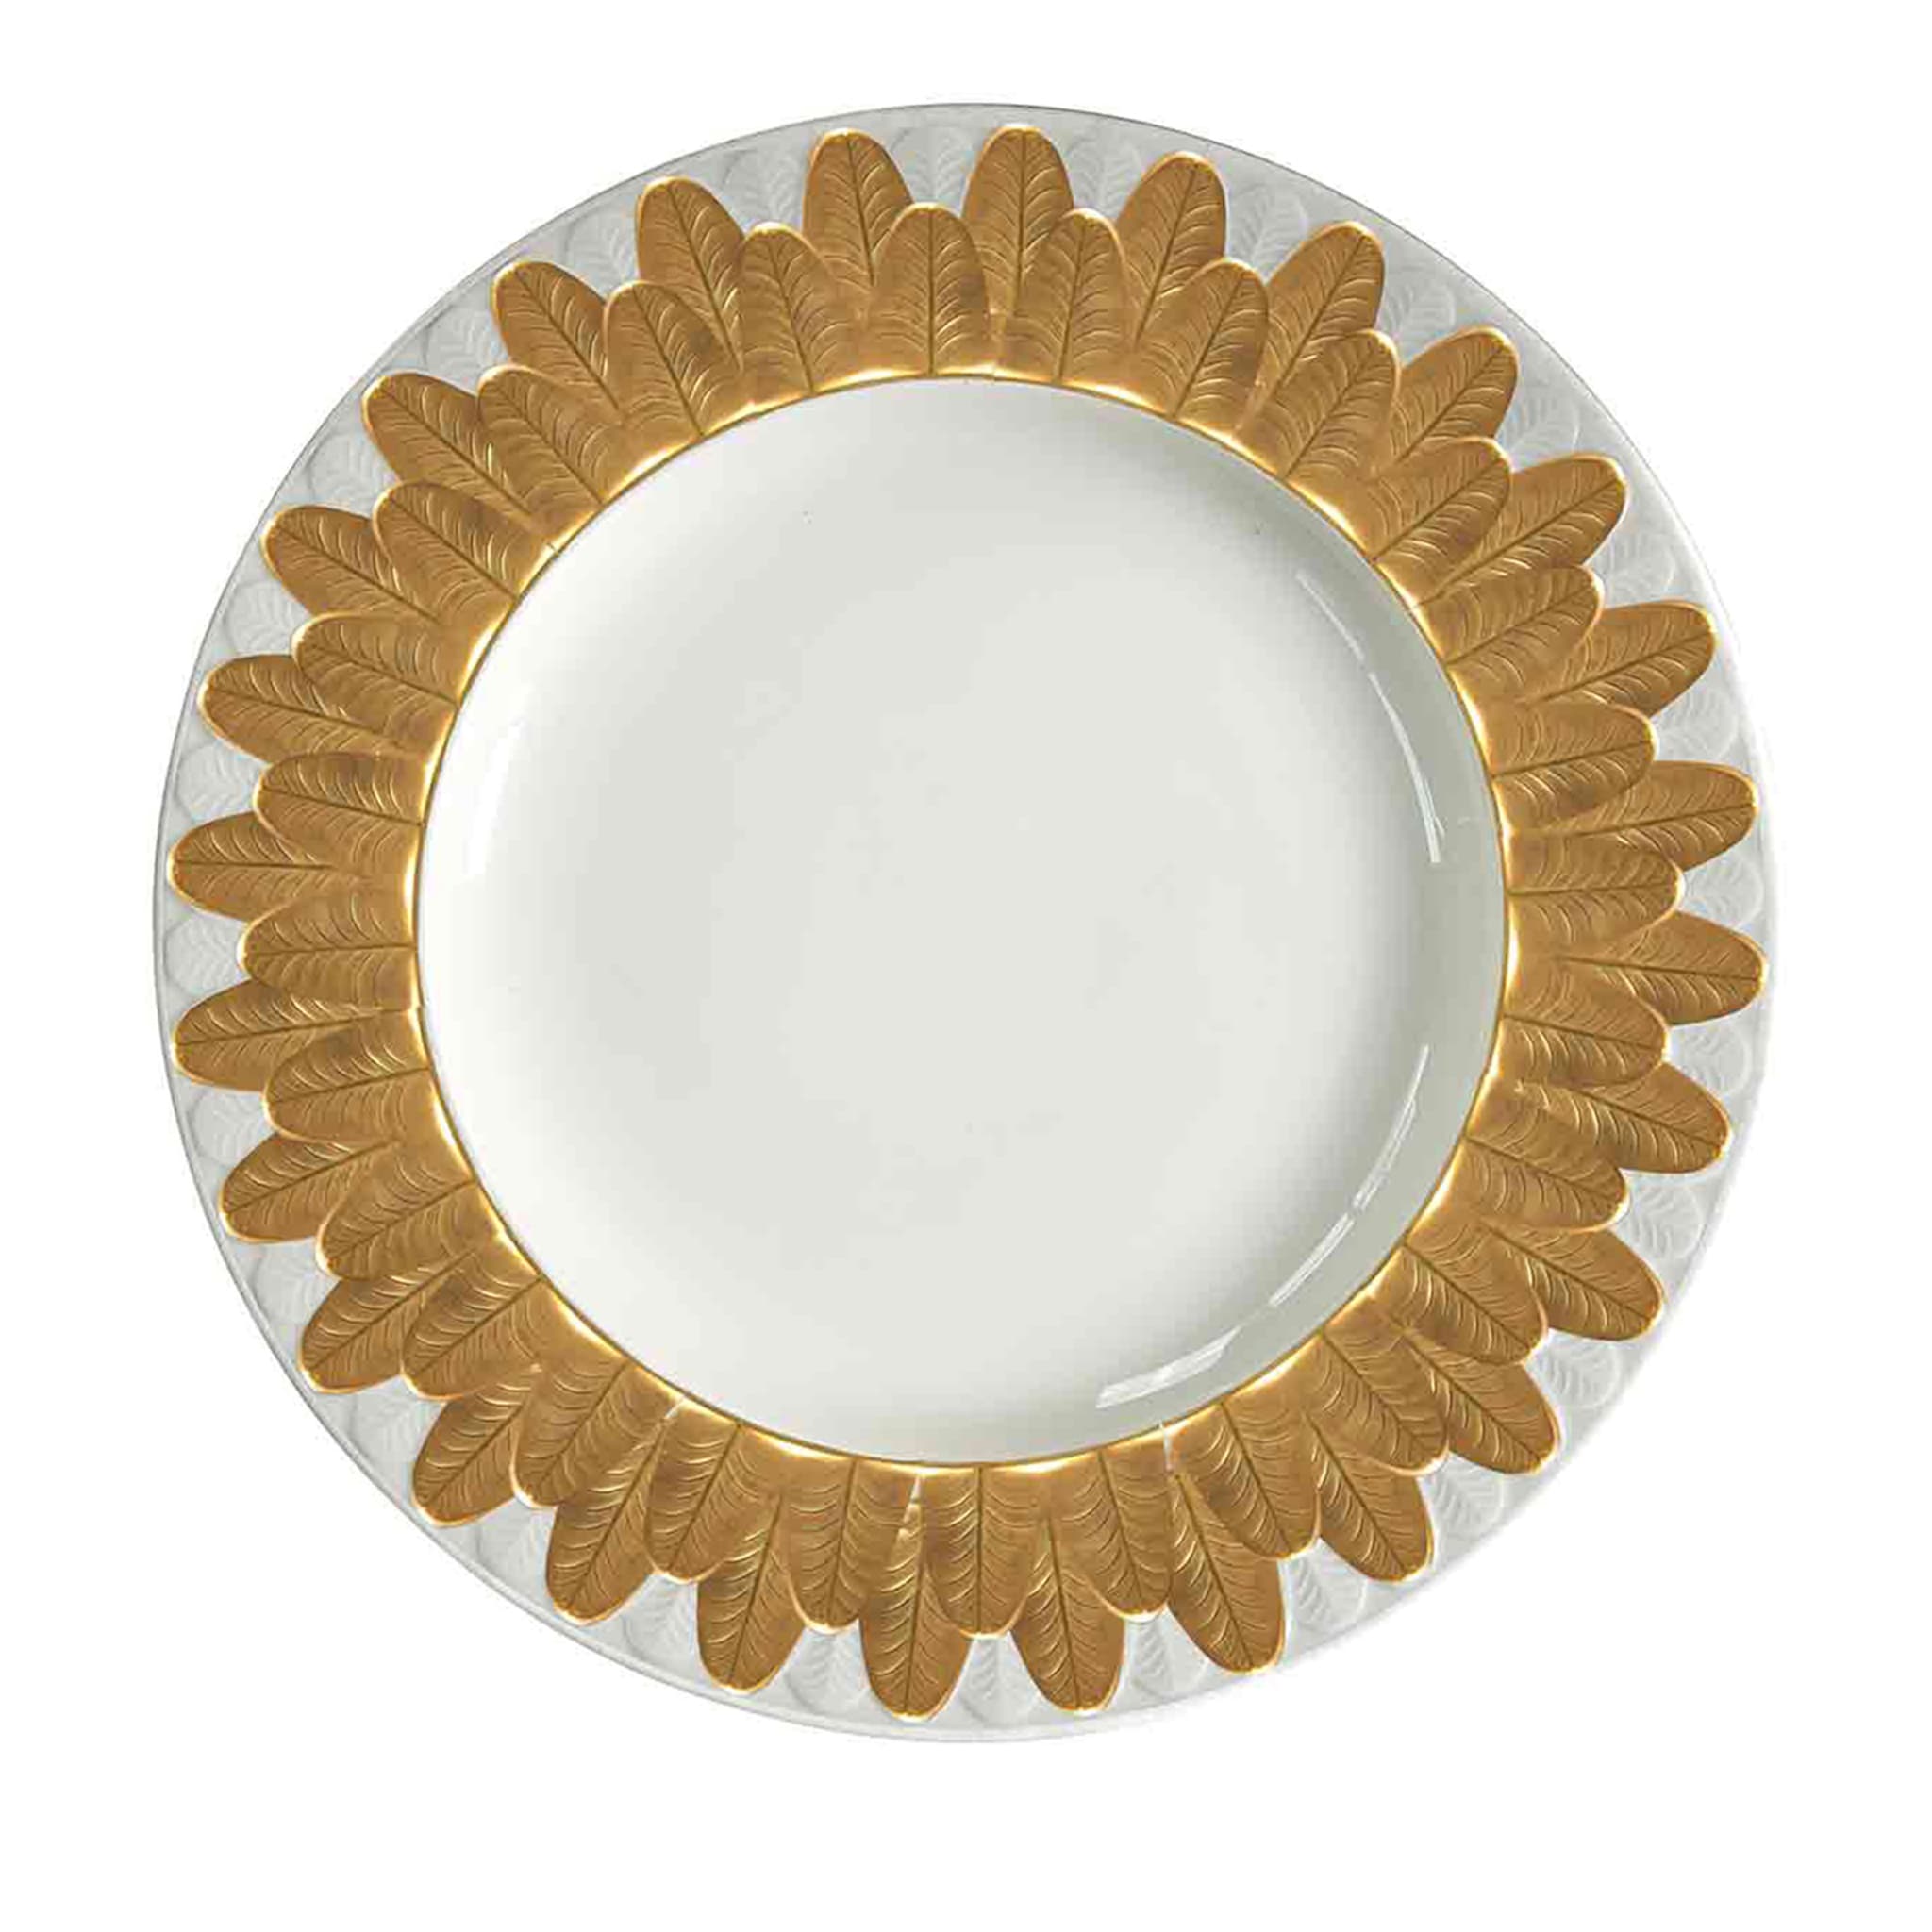 PEACOCK DINNER PLATE - GOLD #2 - Main view